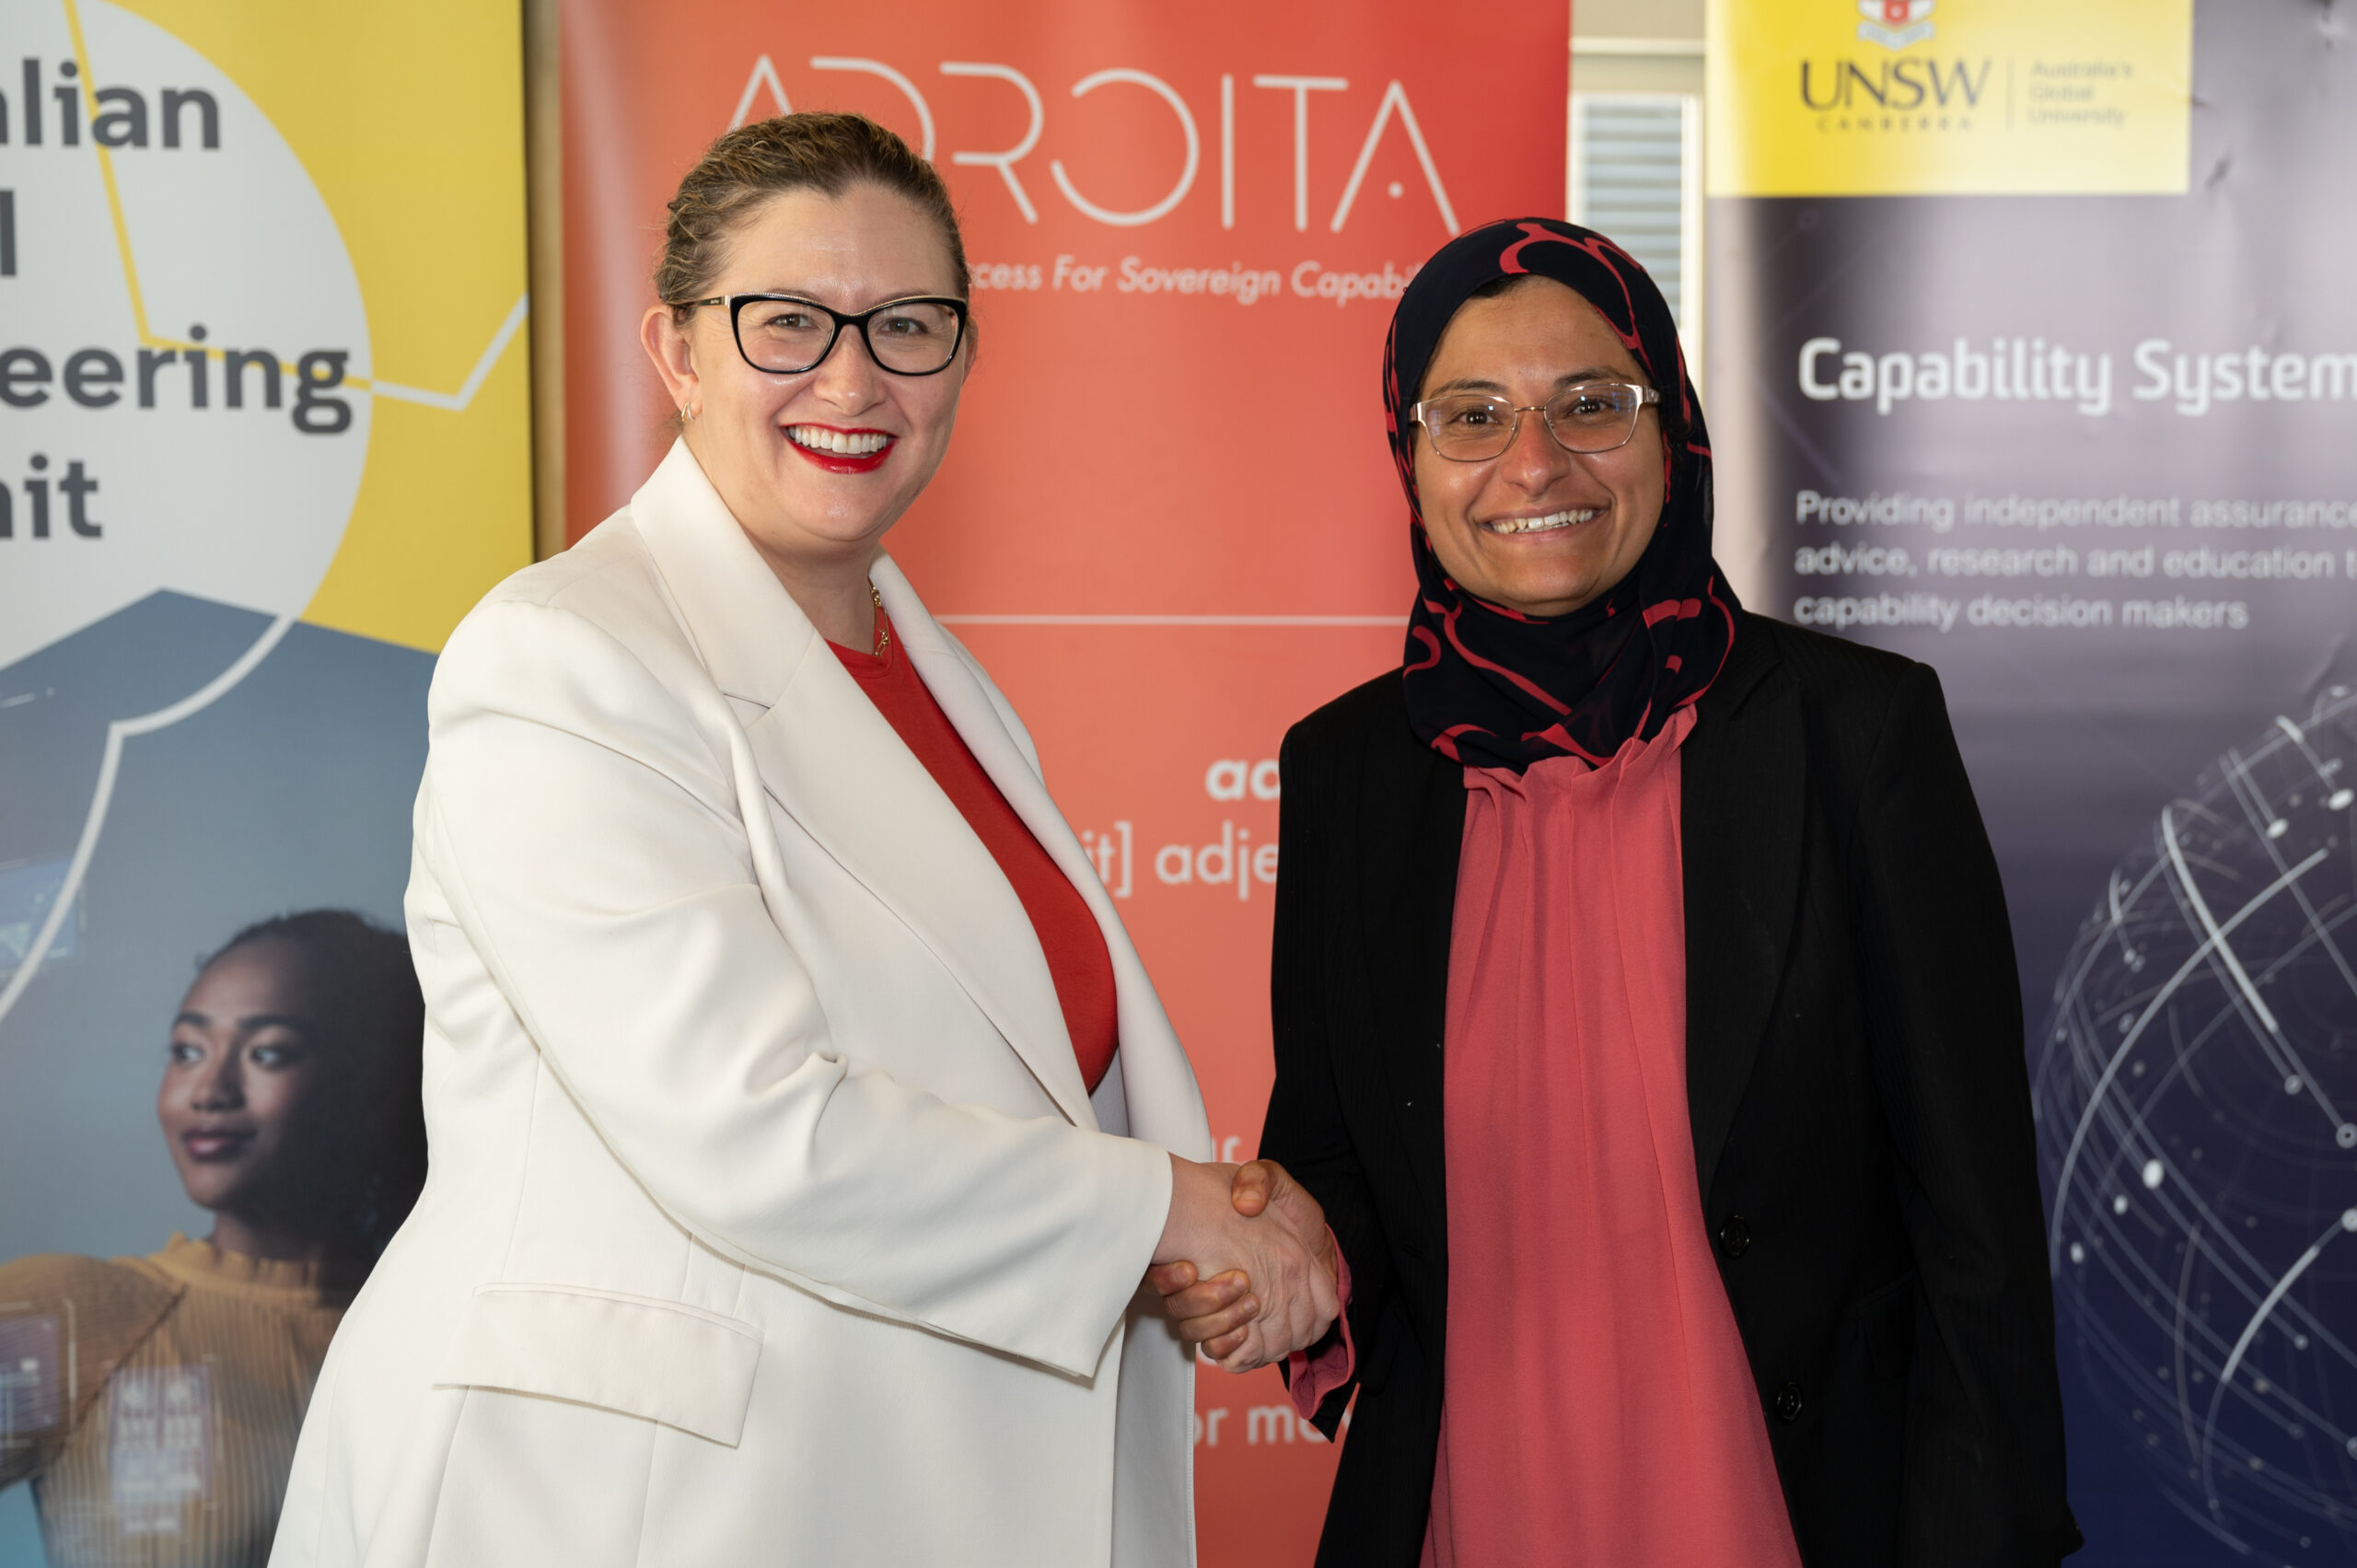 ADROITA partners with UNSW’s Capability Systems Centre image